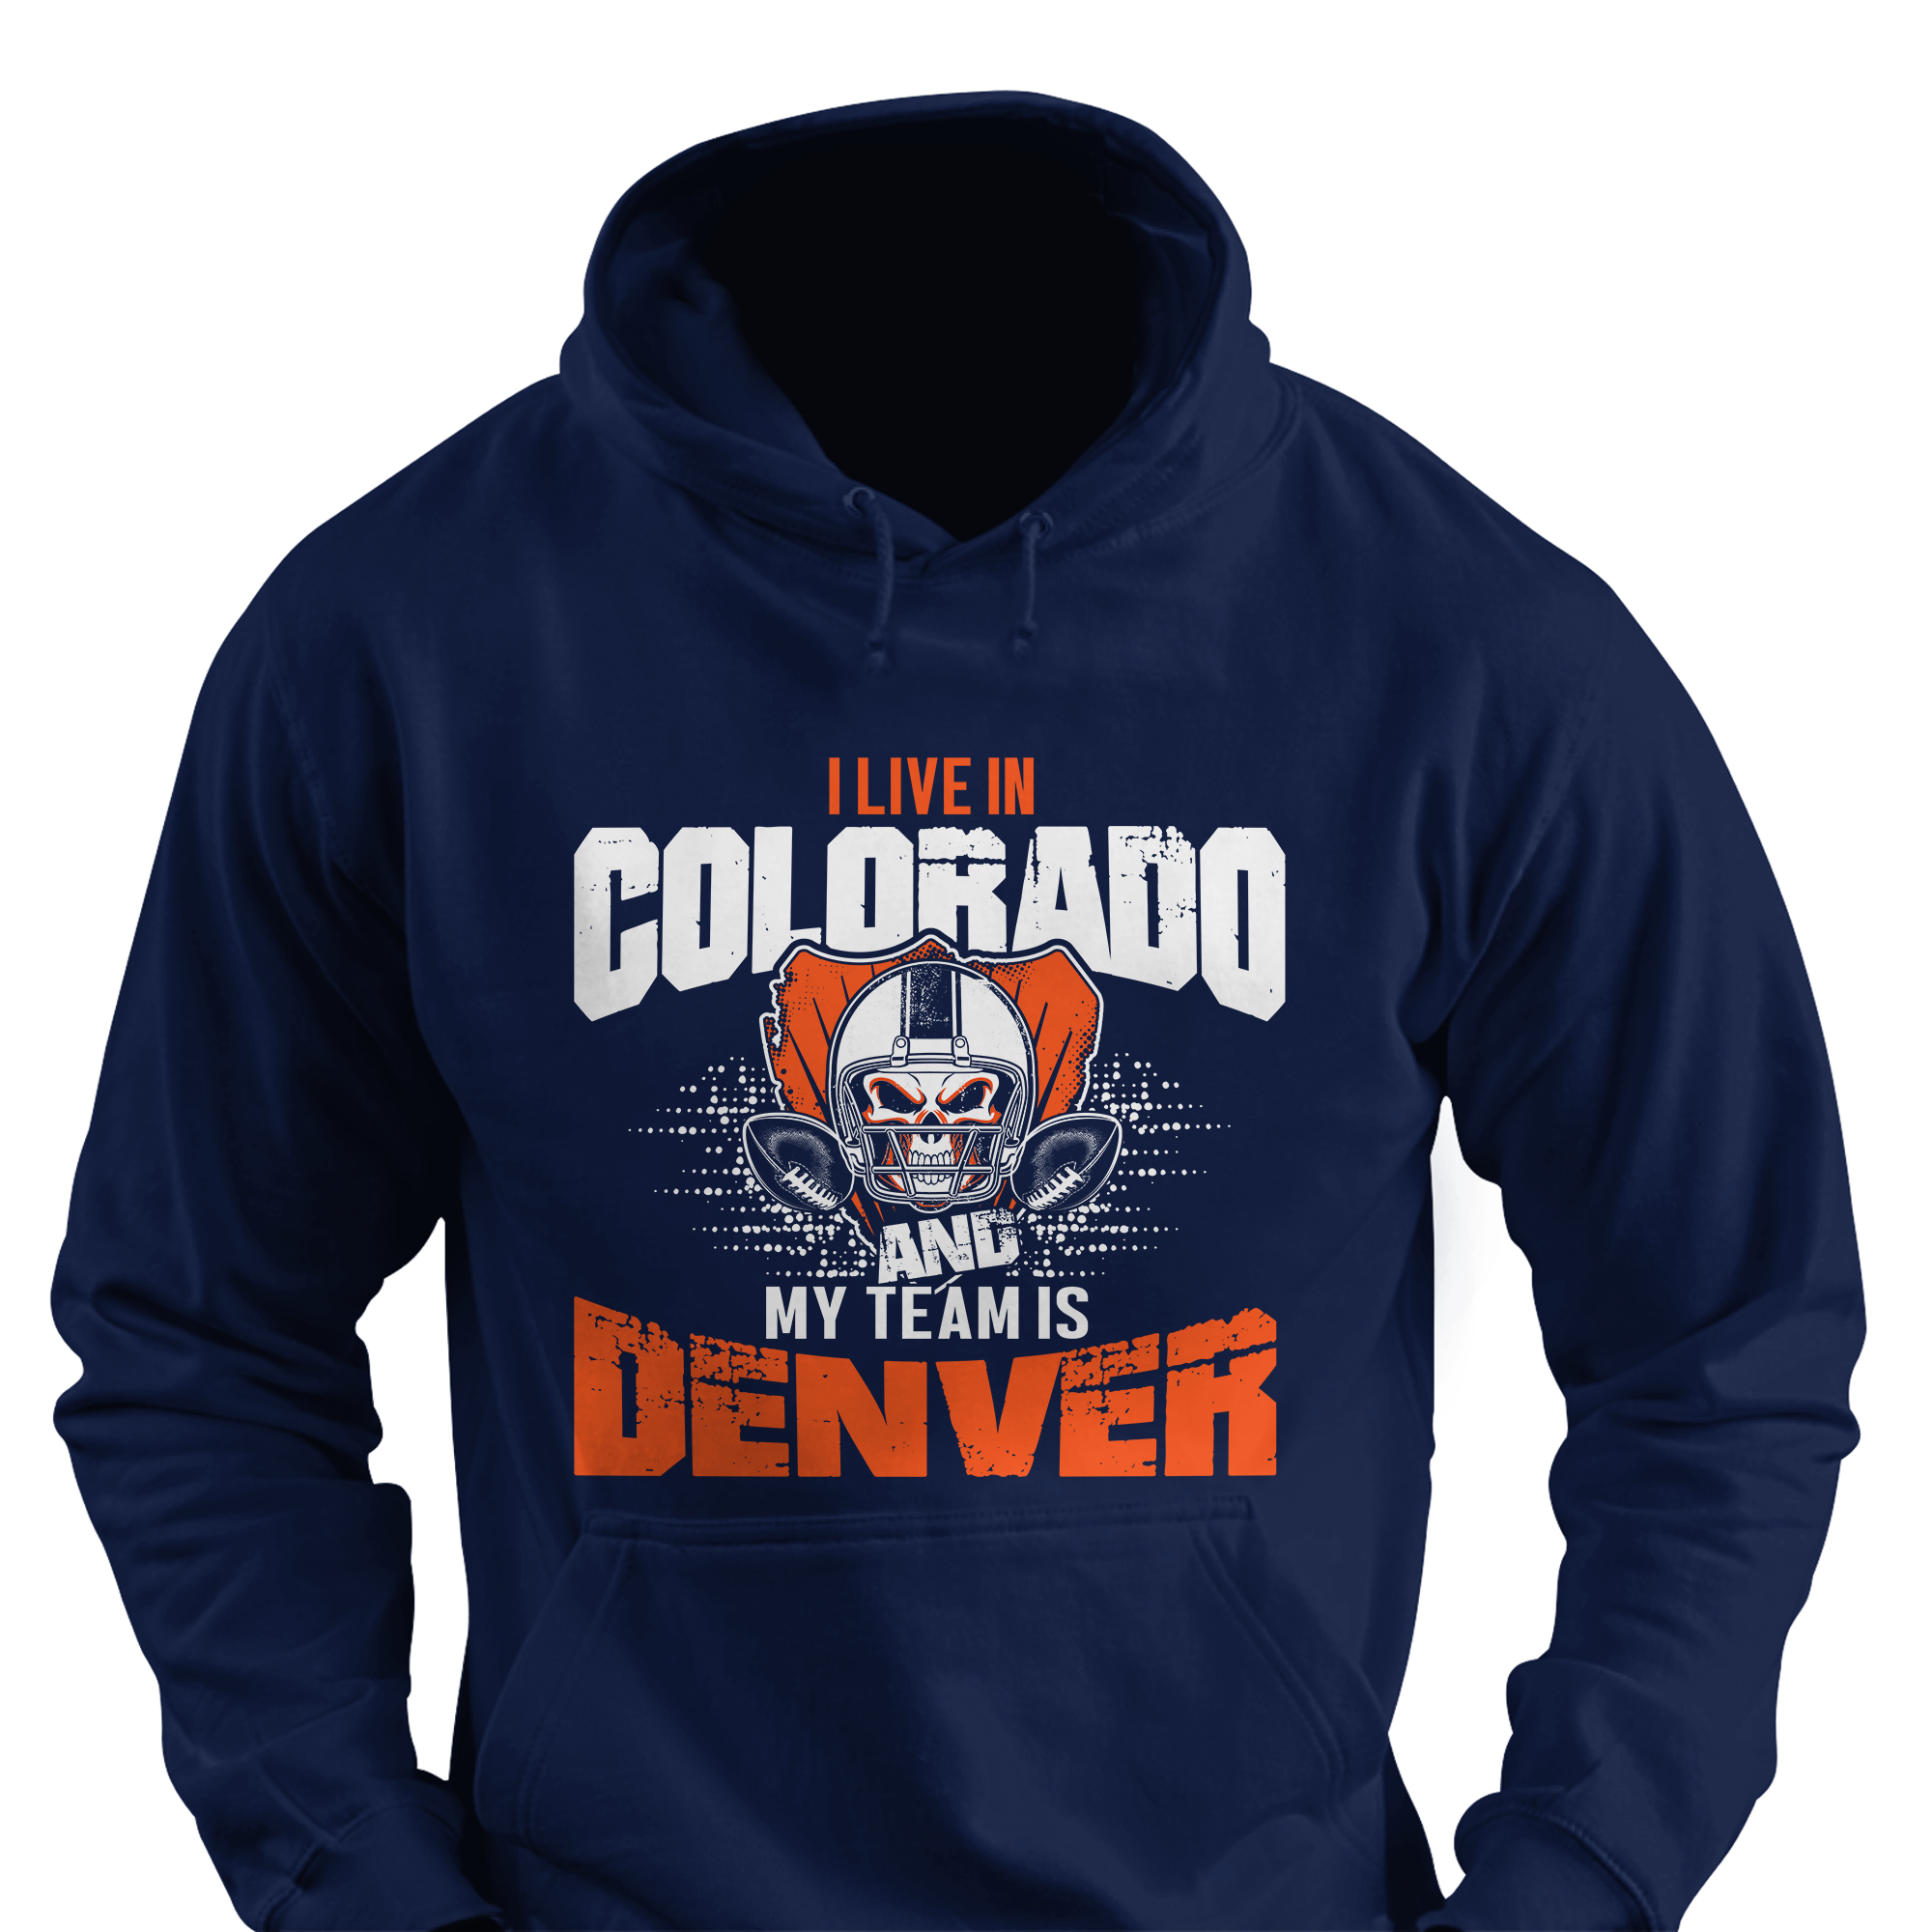 I May Live in Colorado but My Team is Denver